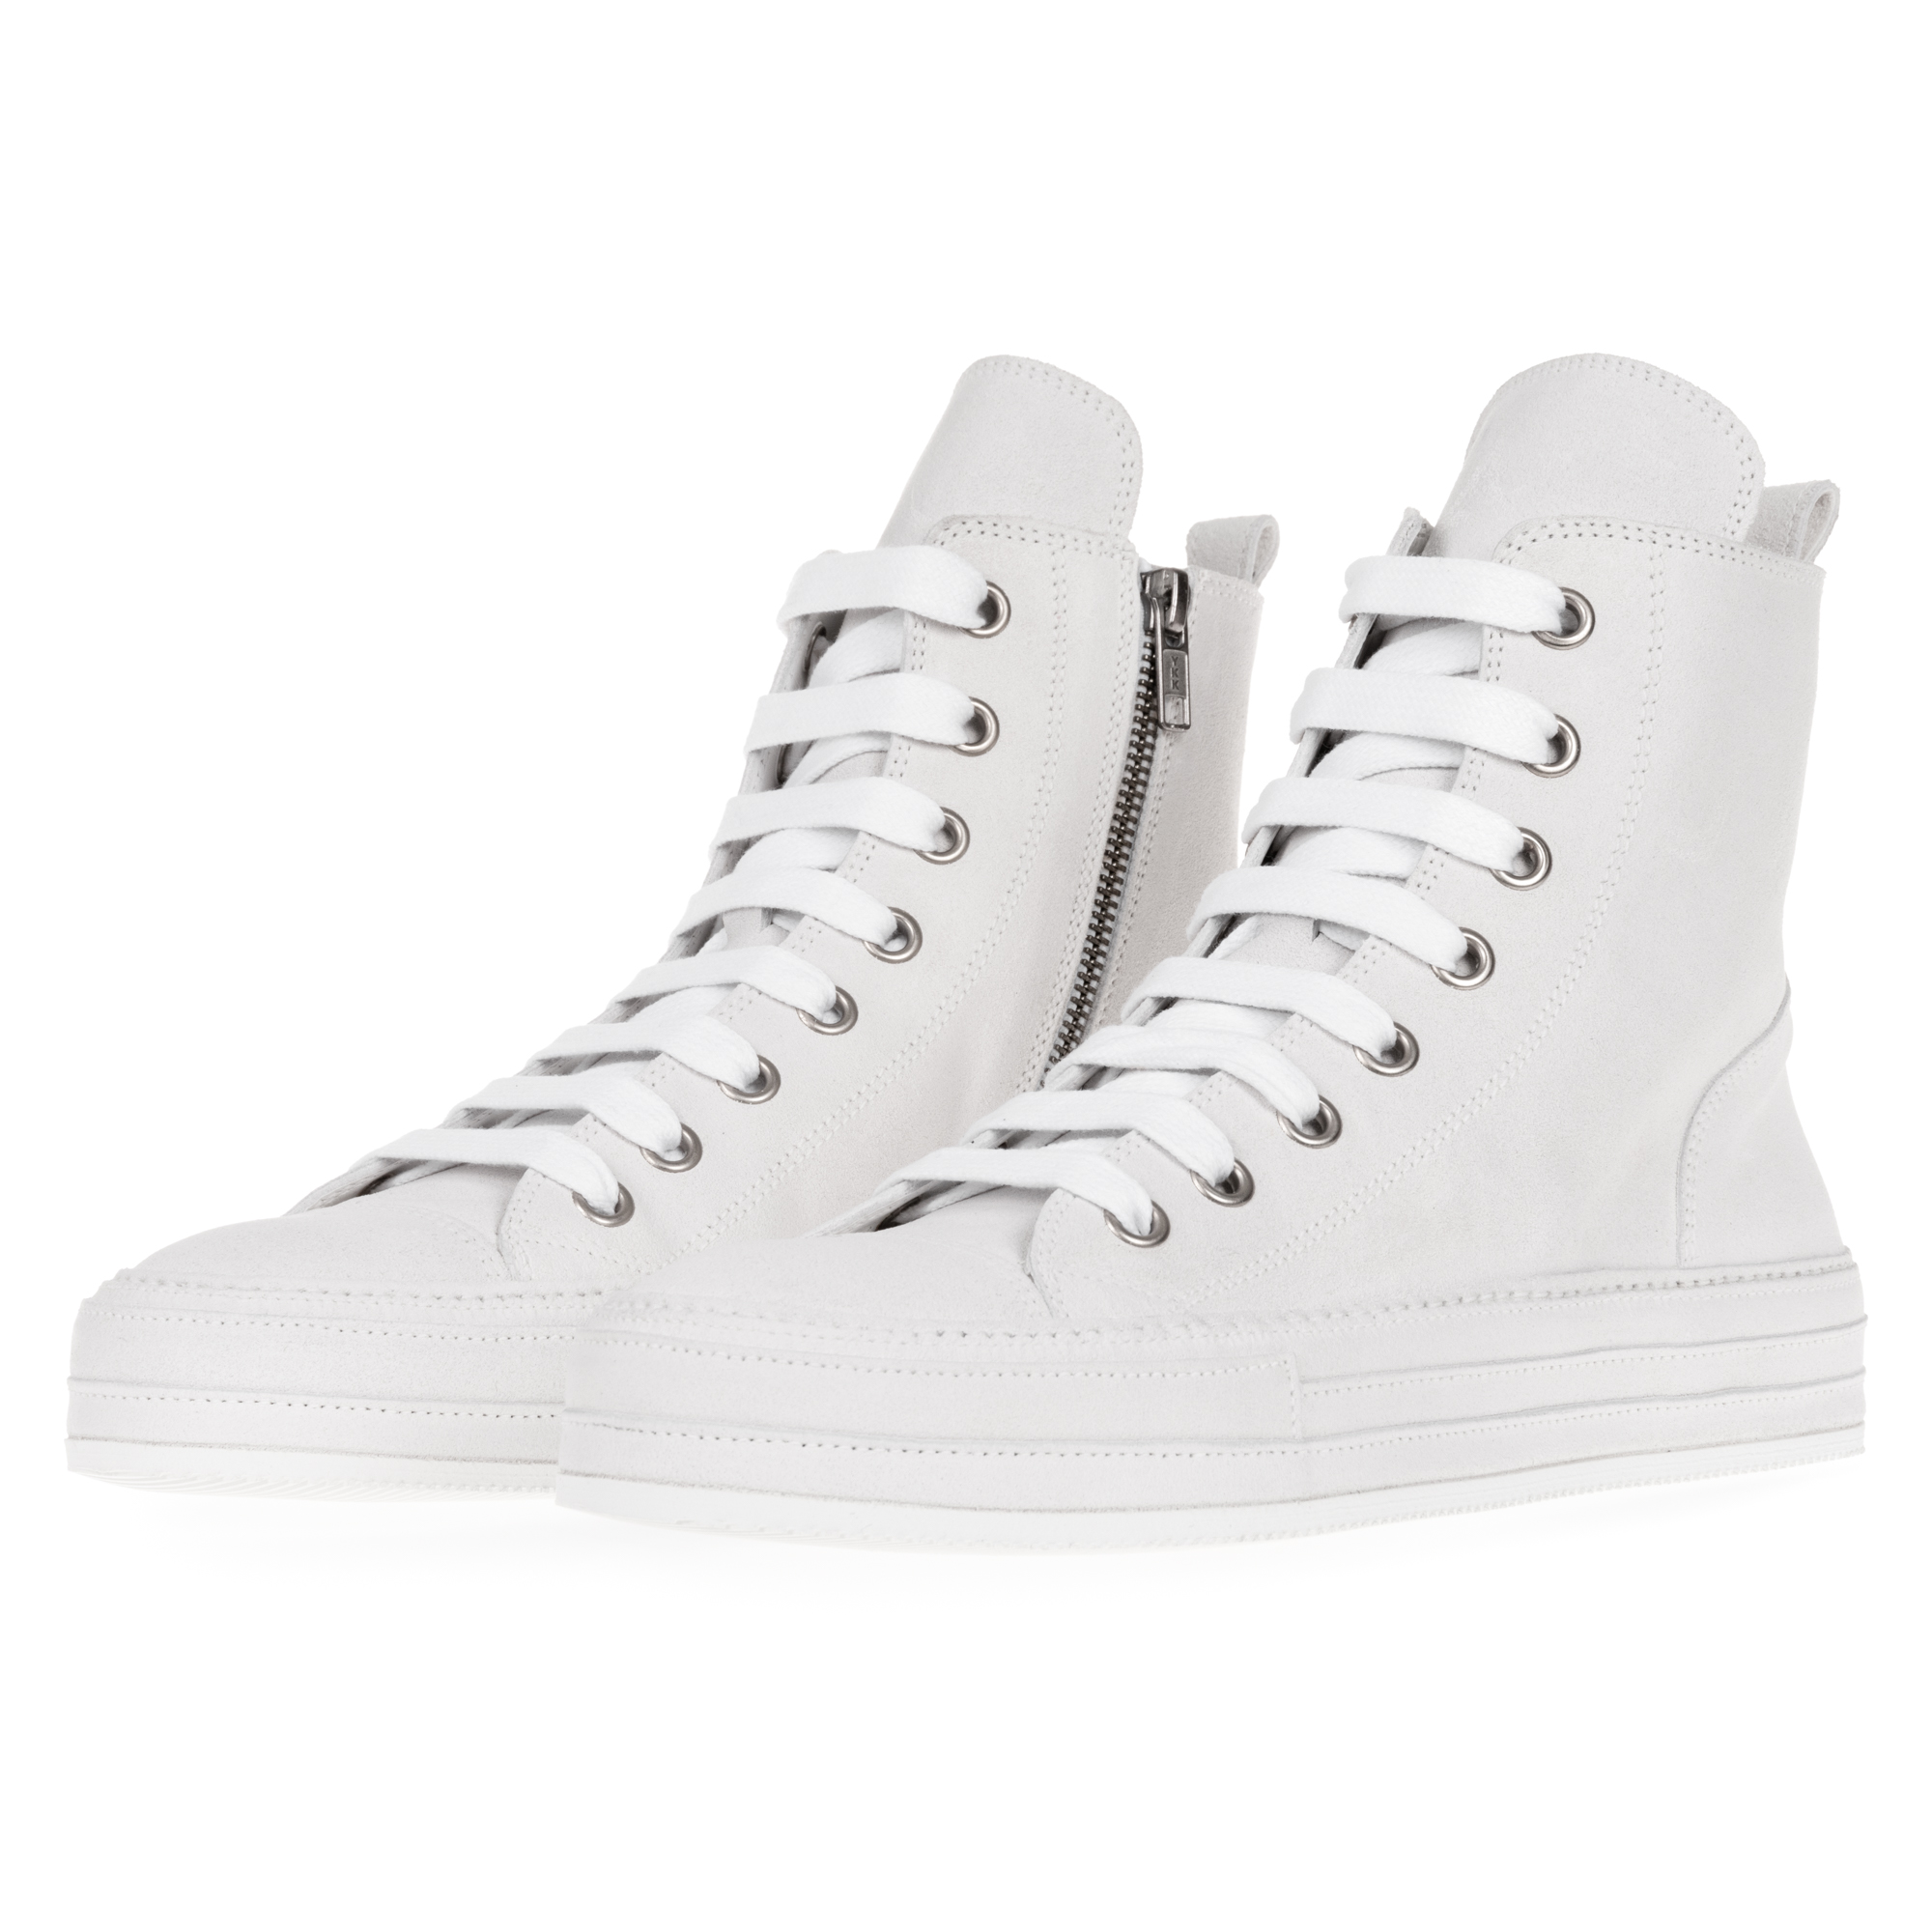 Ambient liste Afslut OFF WHITE LEATHER HIGH TOP SNEAKERS|wolfensson